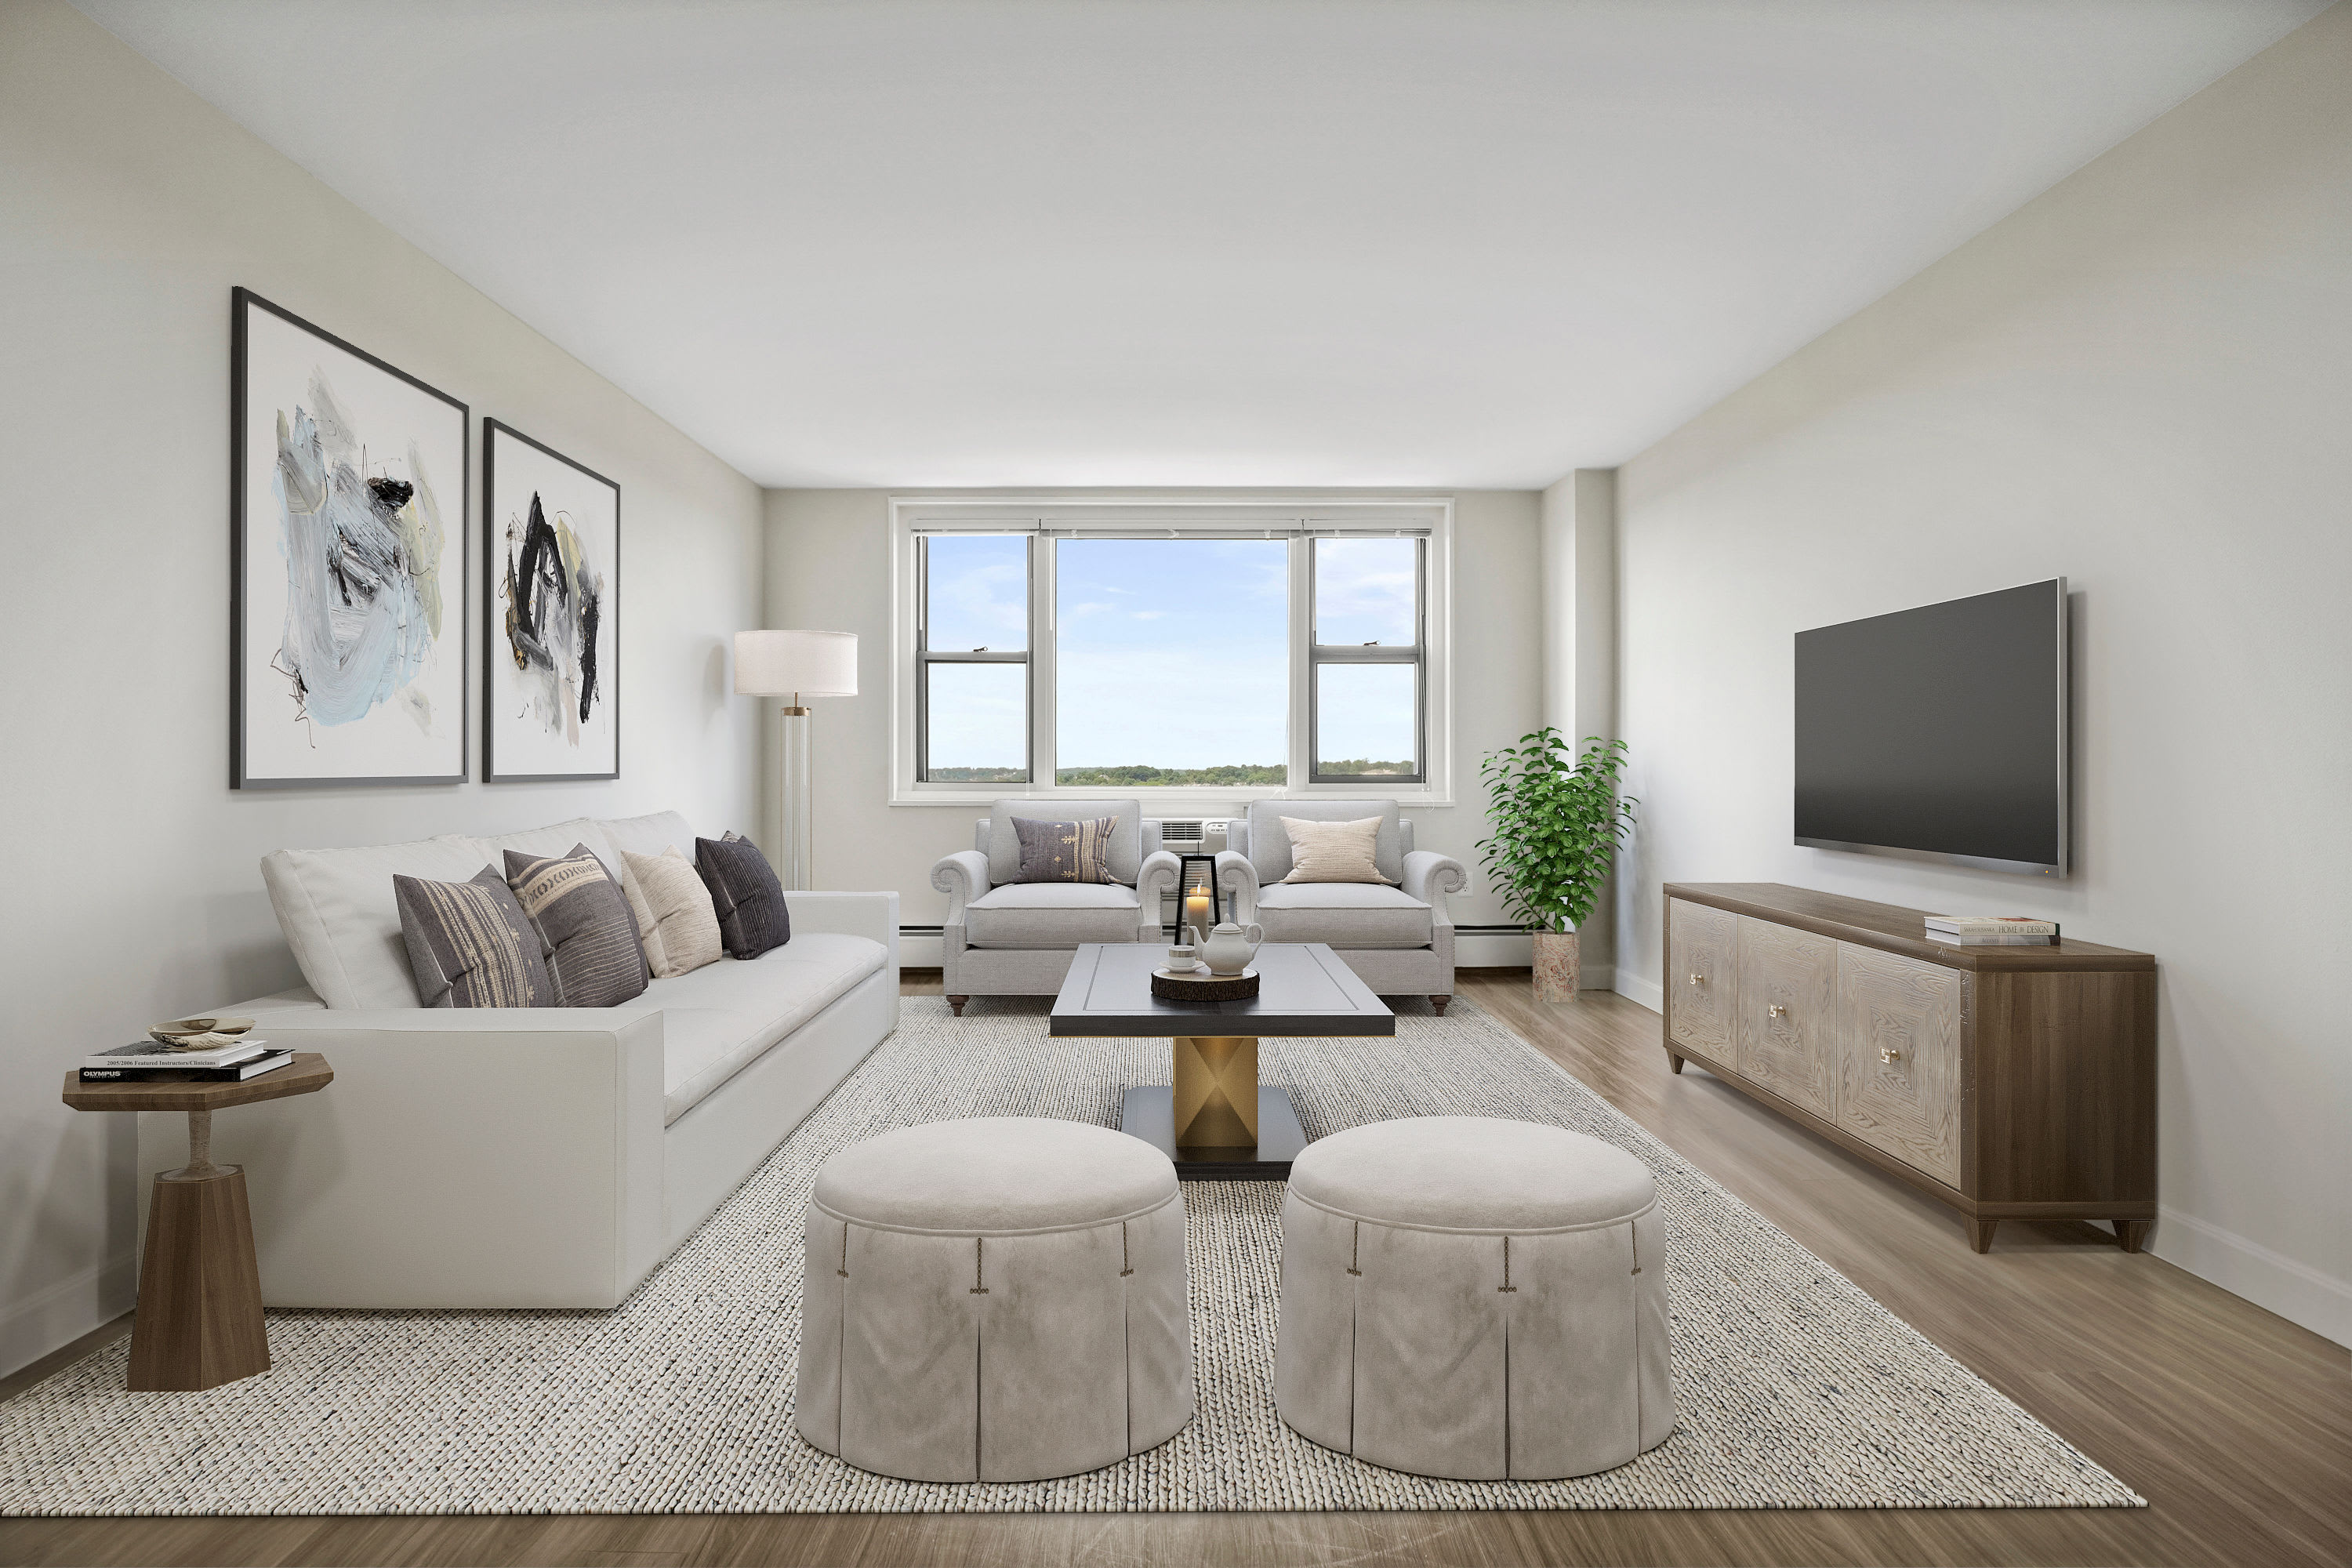 Living Room at Parkside Place in Cambridge, Massachusetts